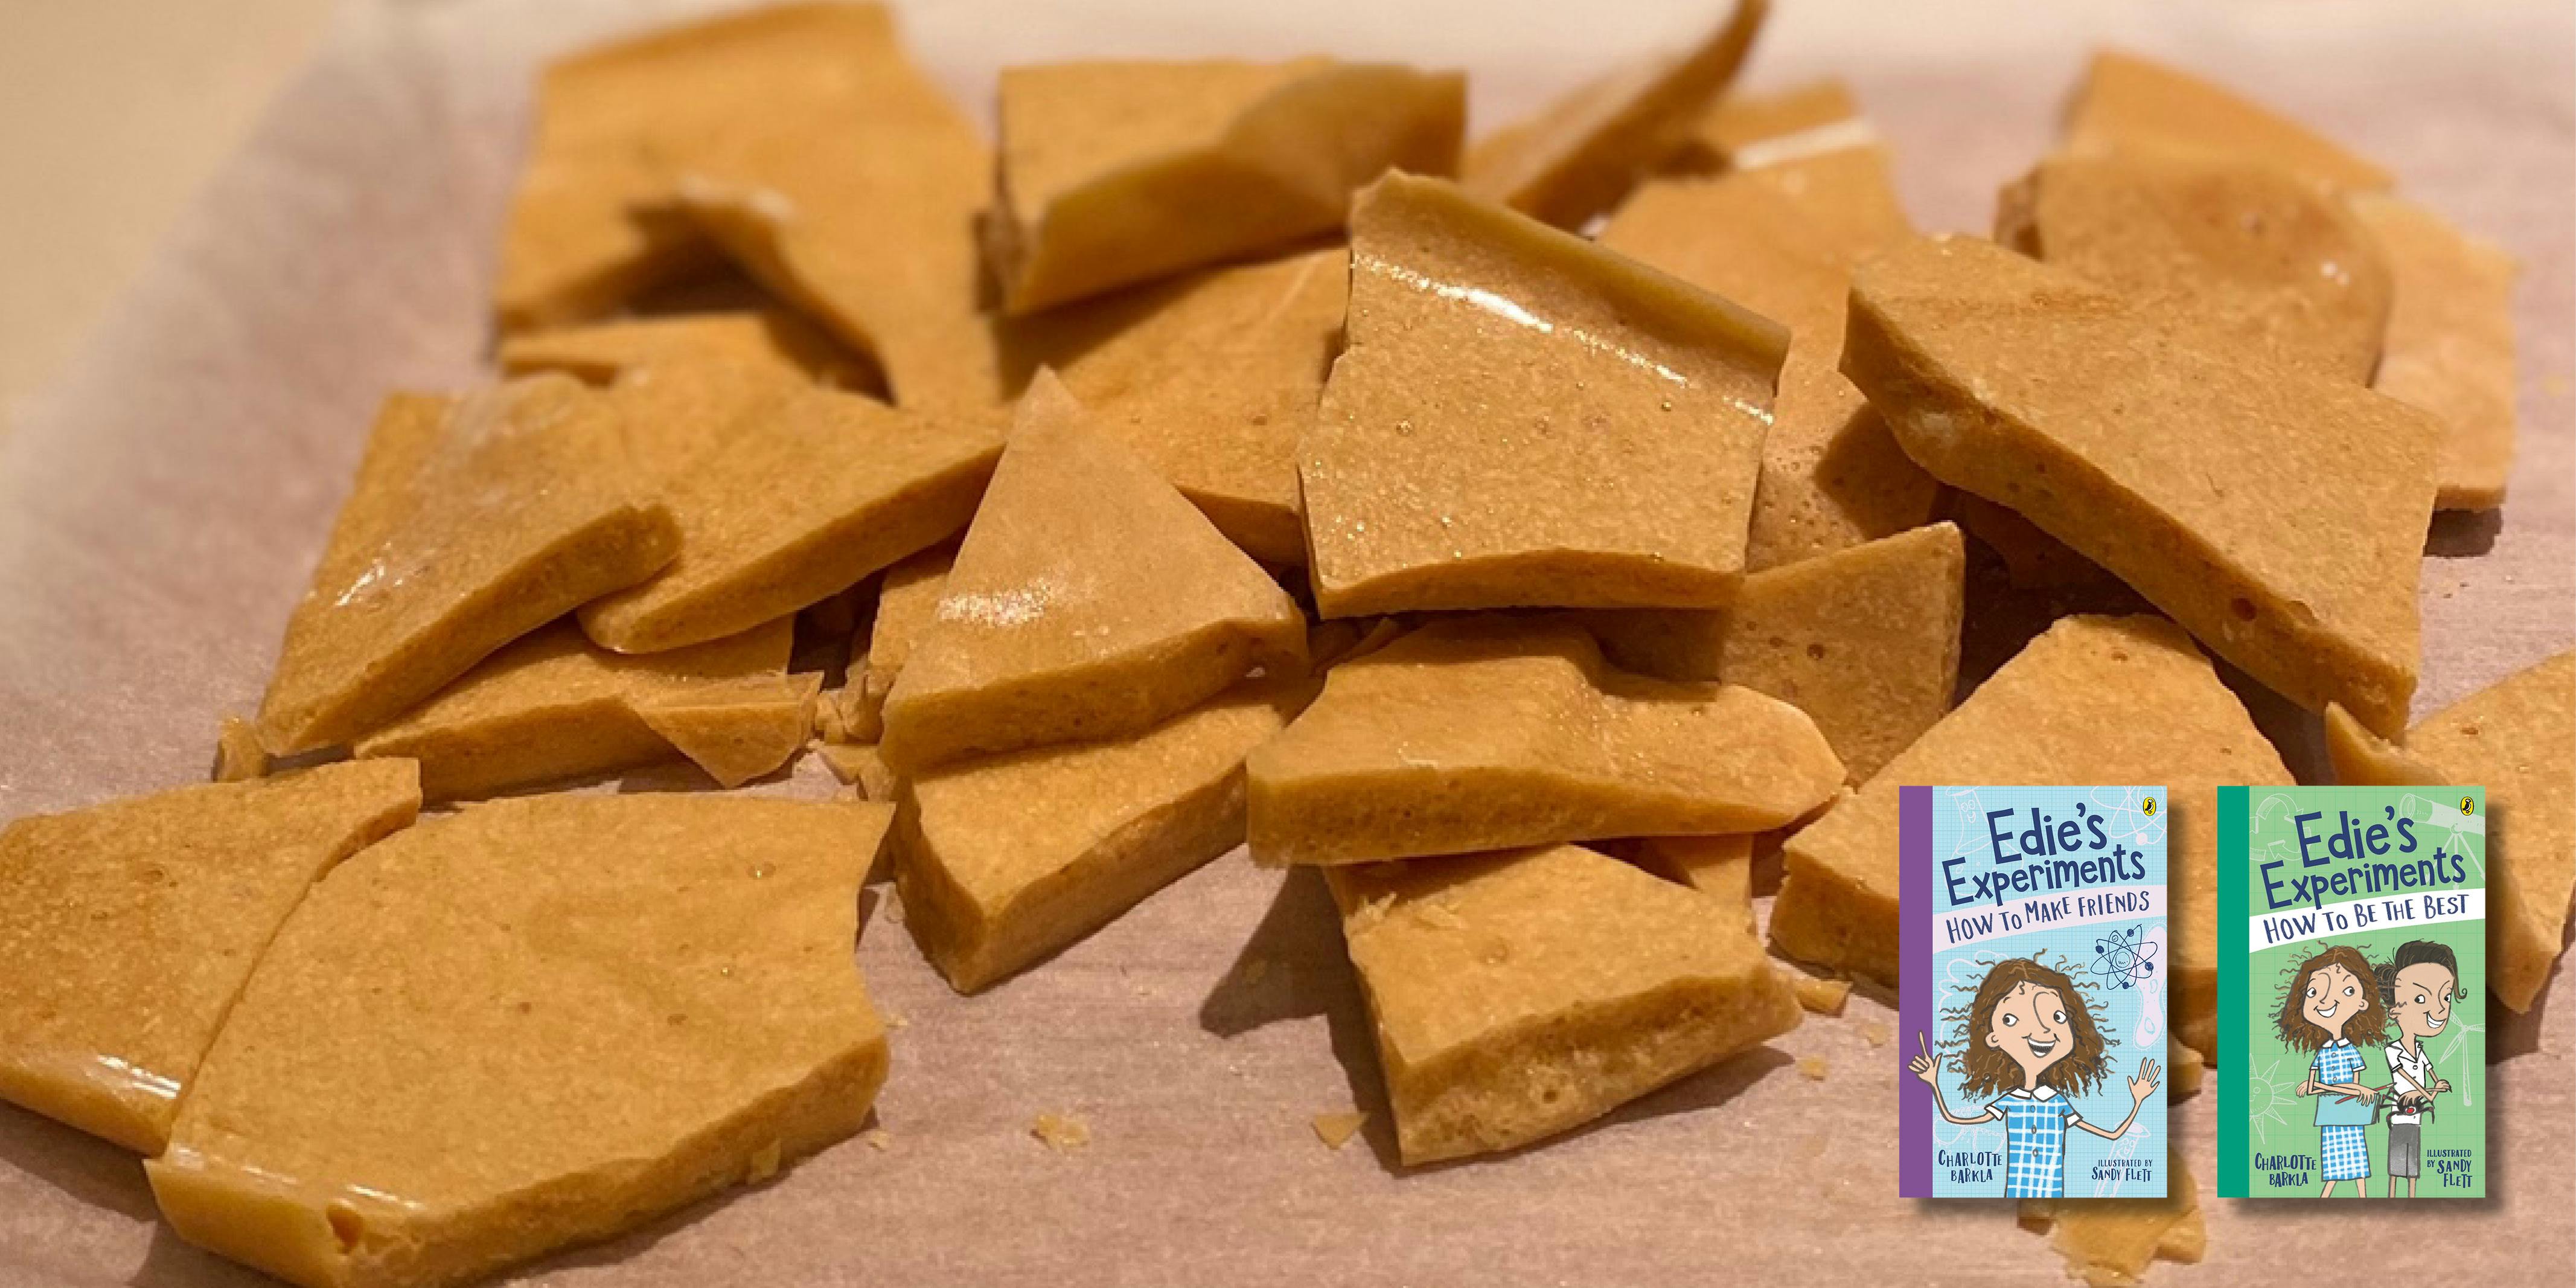 Make Your Own Honeycomb with Edie's Experiments